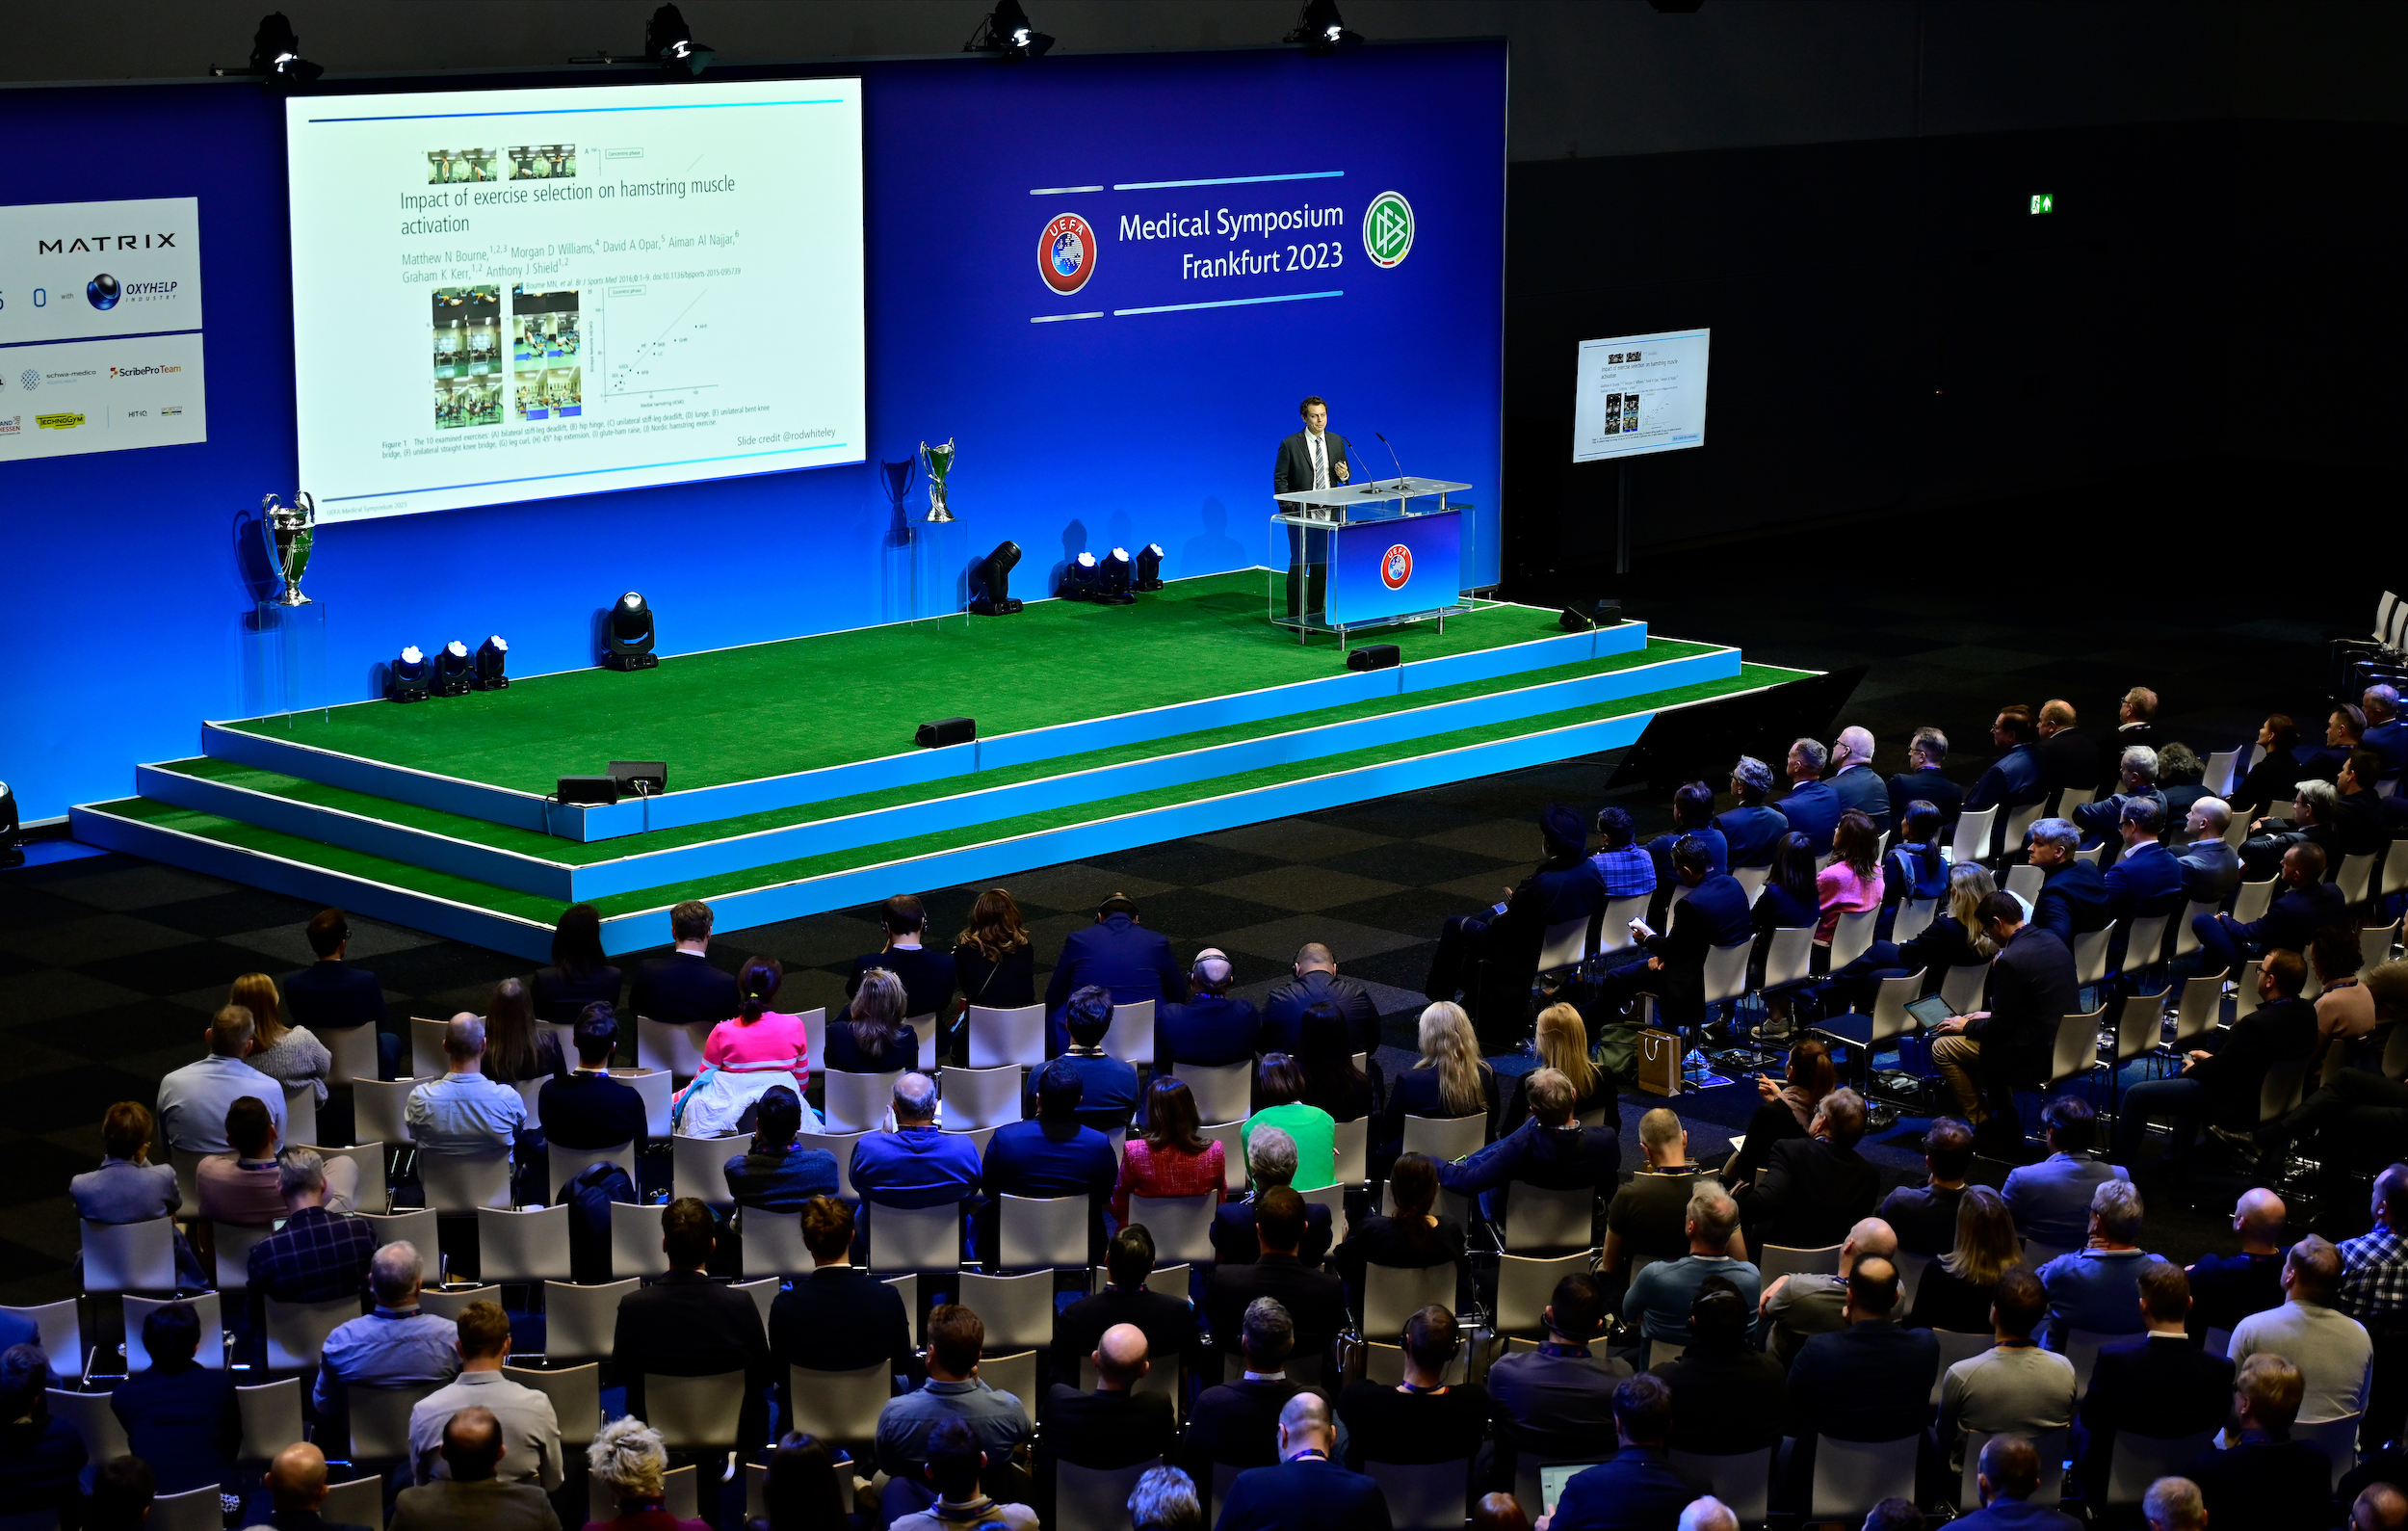 The picture shows the stage of the UEFA Medical Symposium. A speaker is giving a lecture. 